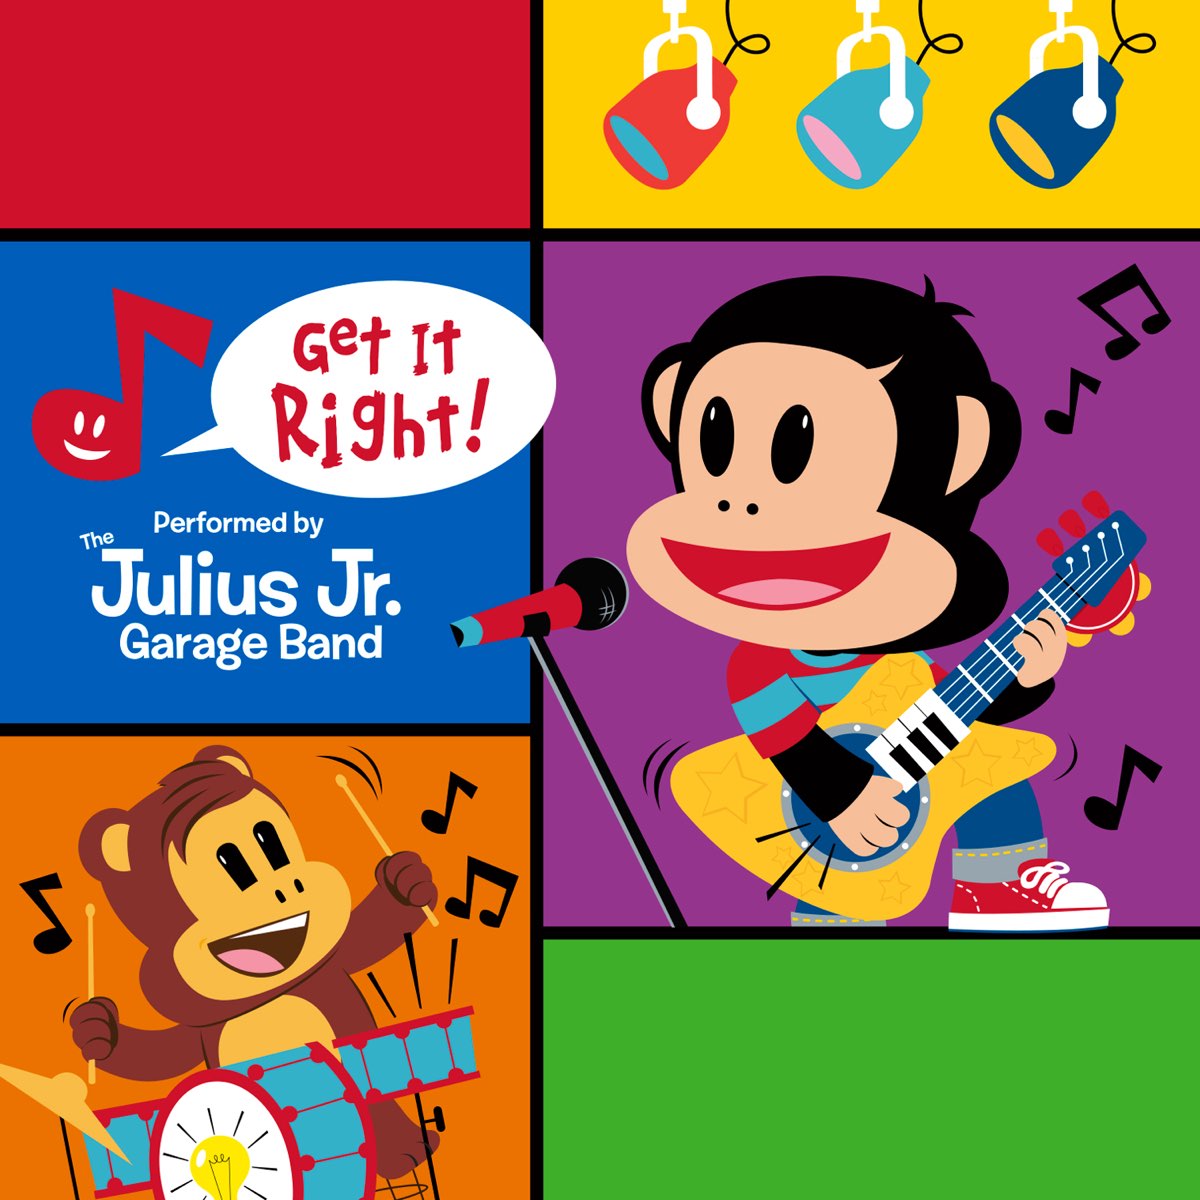 Get It Right! by The Julius Jr. Garage Band